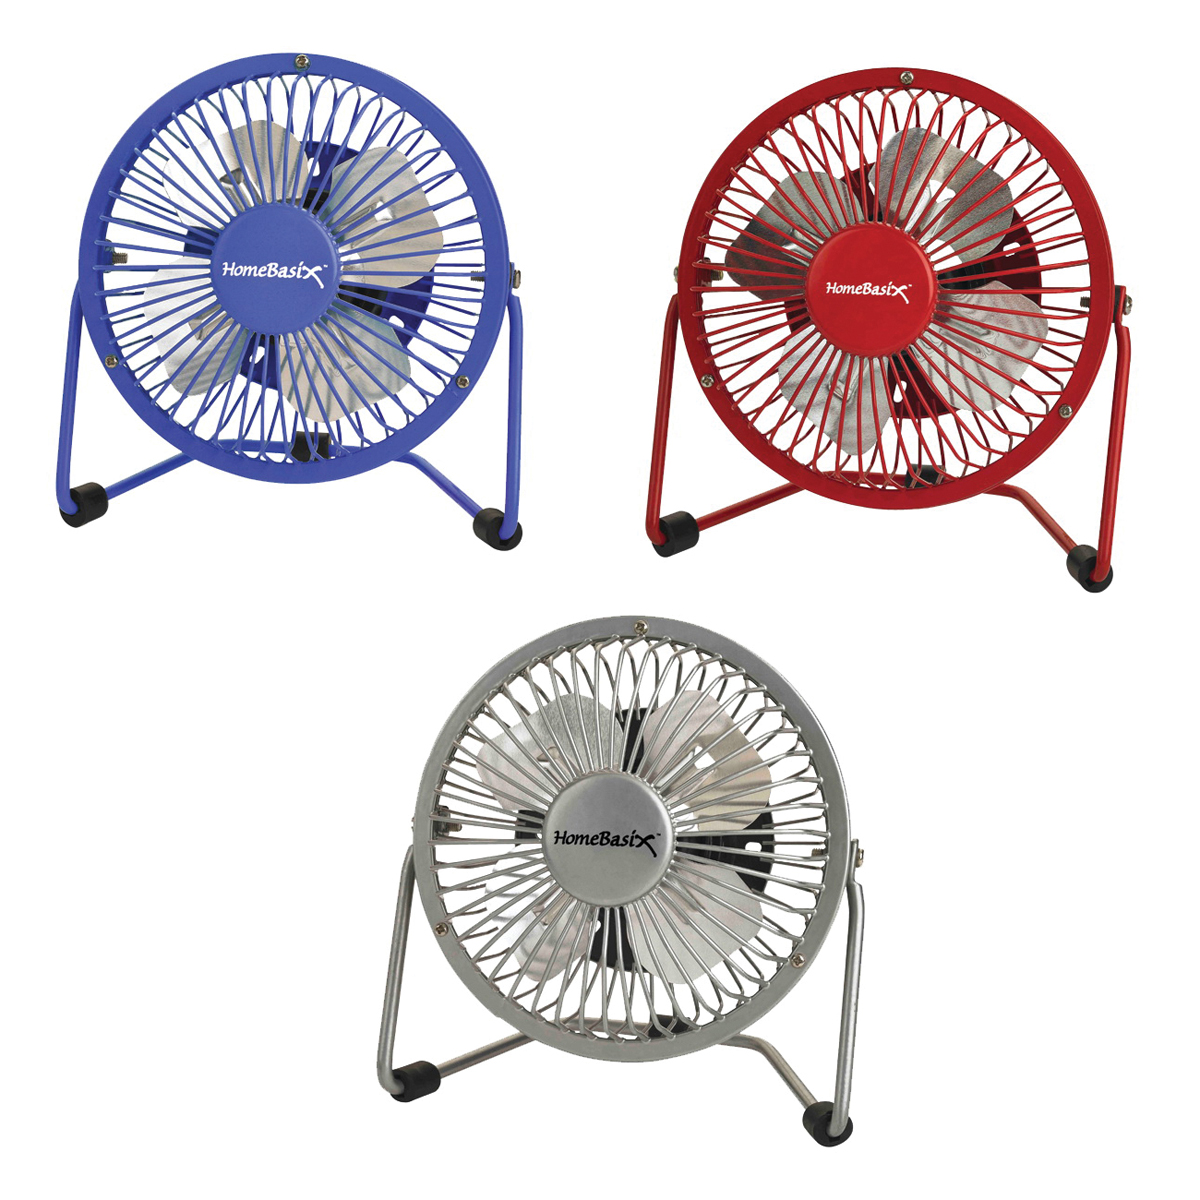 FE-20 Personal Fan, 120 VAC, 4 in Dia Blade, 4-Blade, 1-Speed, 360 deg Rotating, Blue/Red/Silver